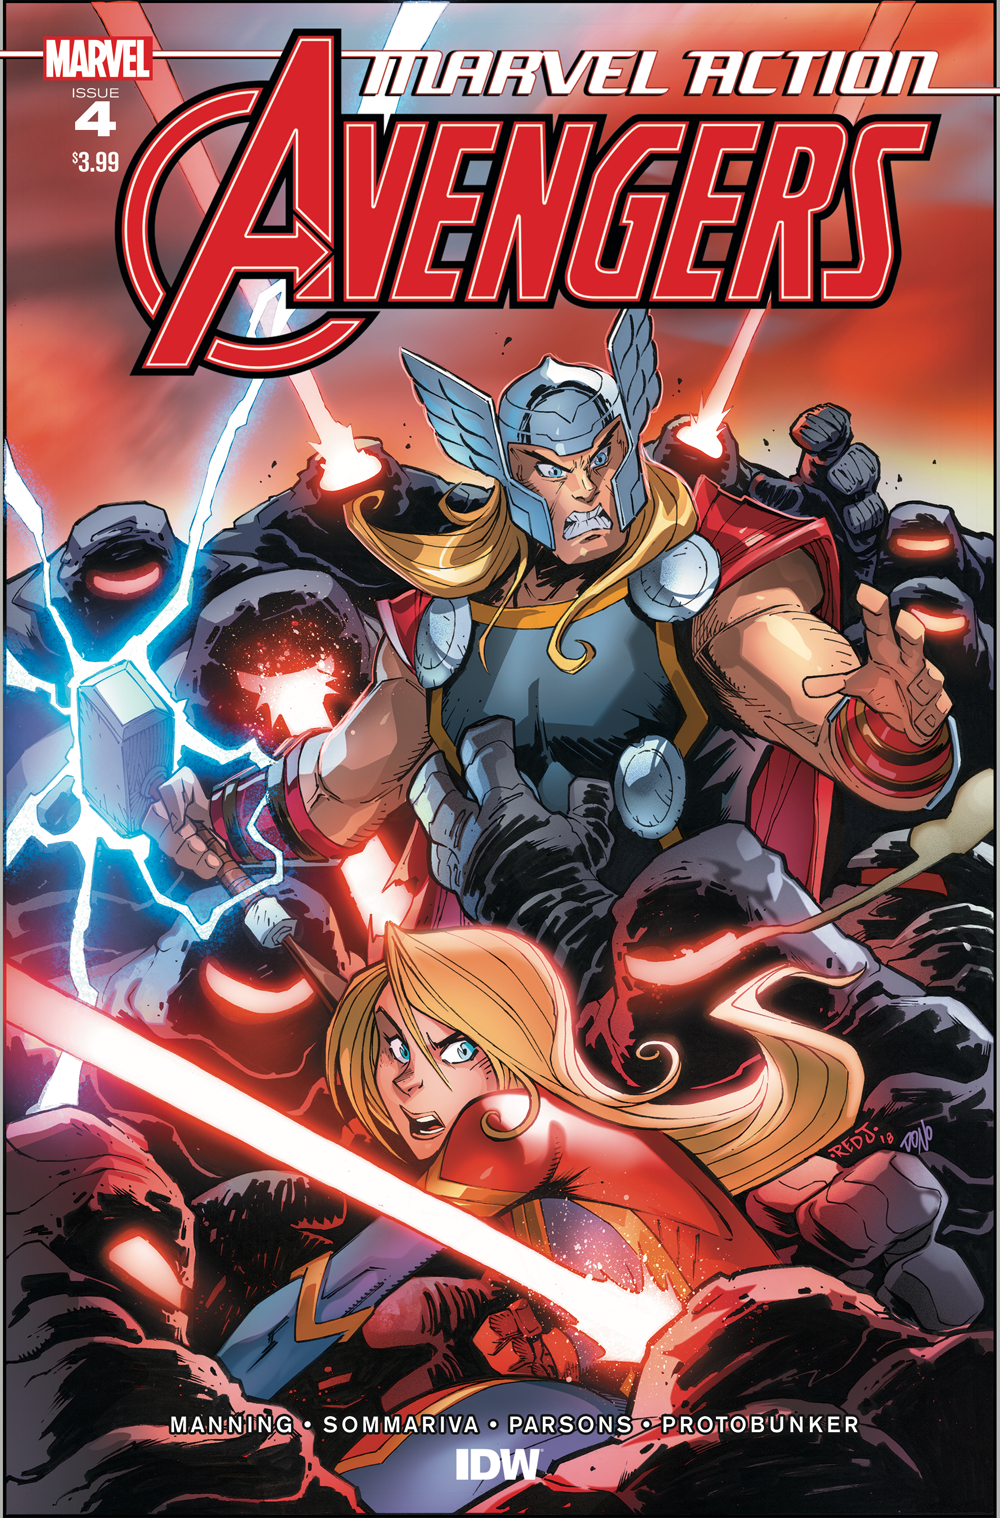 Marvel Action Avengers no. 4 (2018 Series)